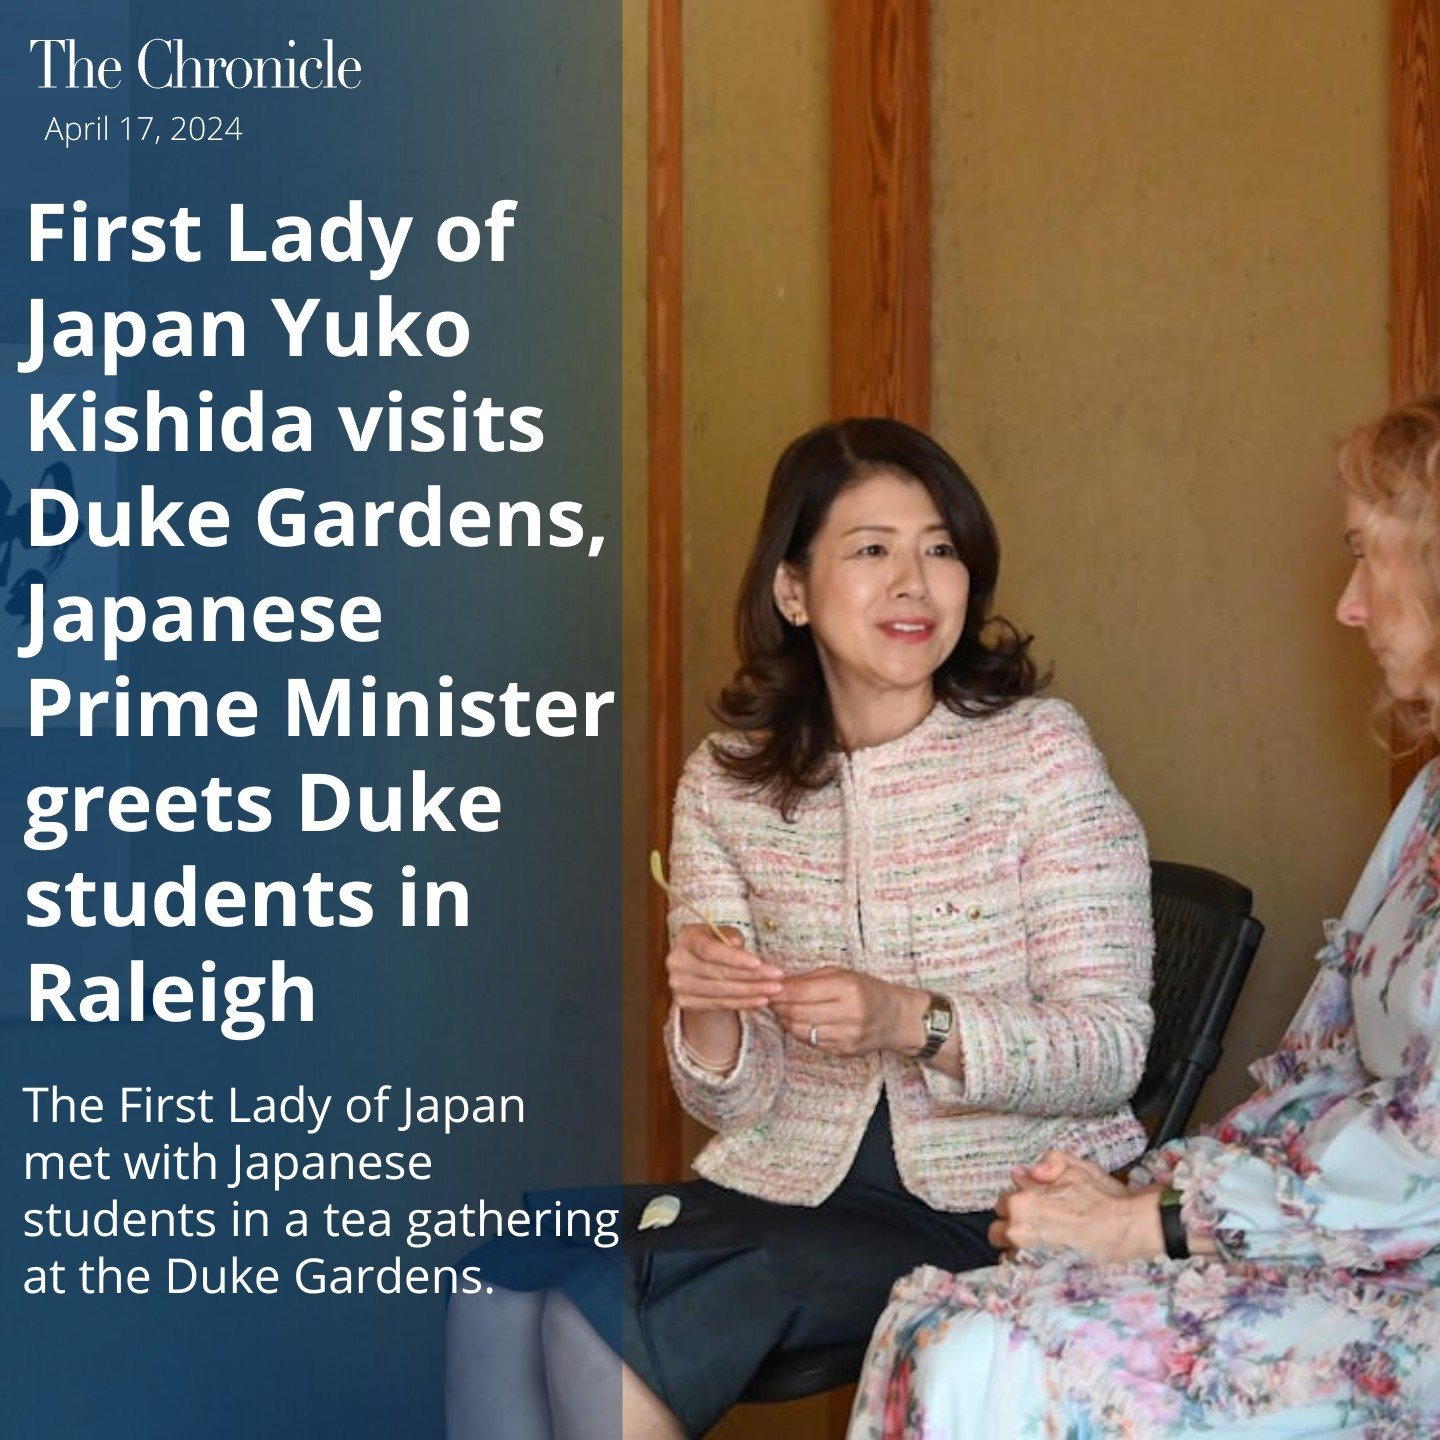 Yuko Kishida, the wife of Japanese Prime Minister Fumio Kishida, visited the Sarah P. Duke Gardens Friday morning to meet with Japanese students and participate in a tea gathering. In the afternoon, both Kishidas met with six Japanese students, inclu